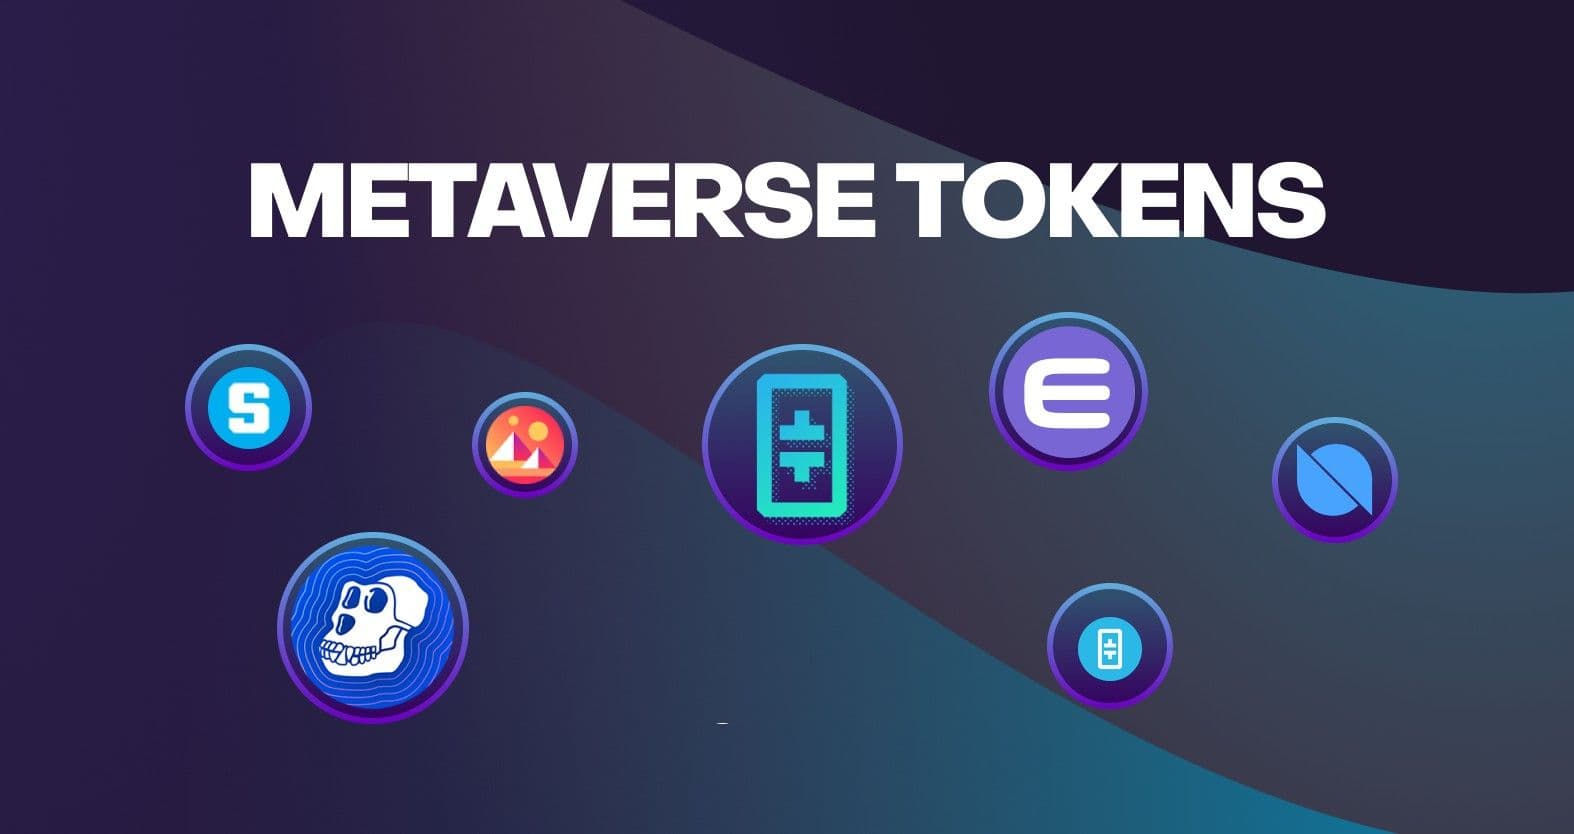 Metaverse Tokens: What They Are and How to Buy Them